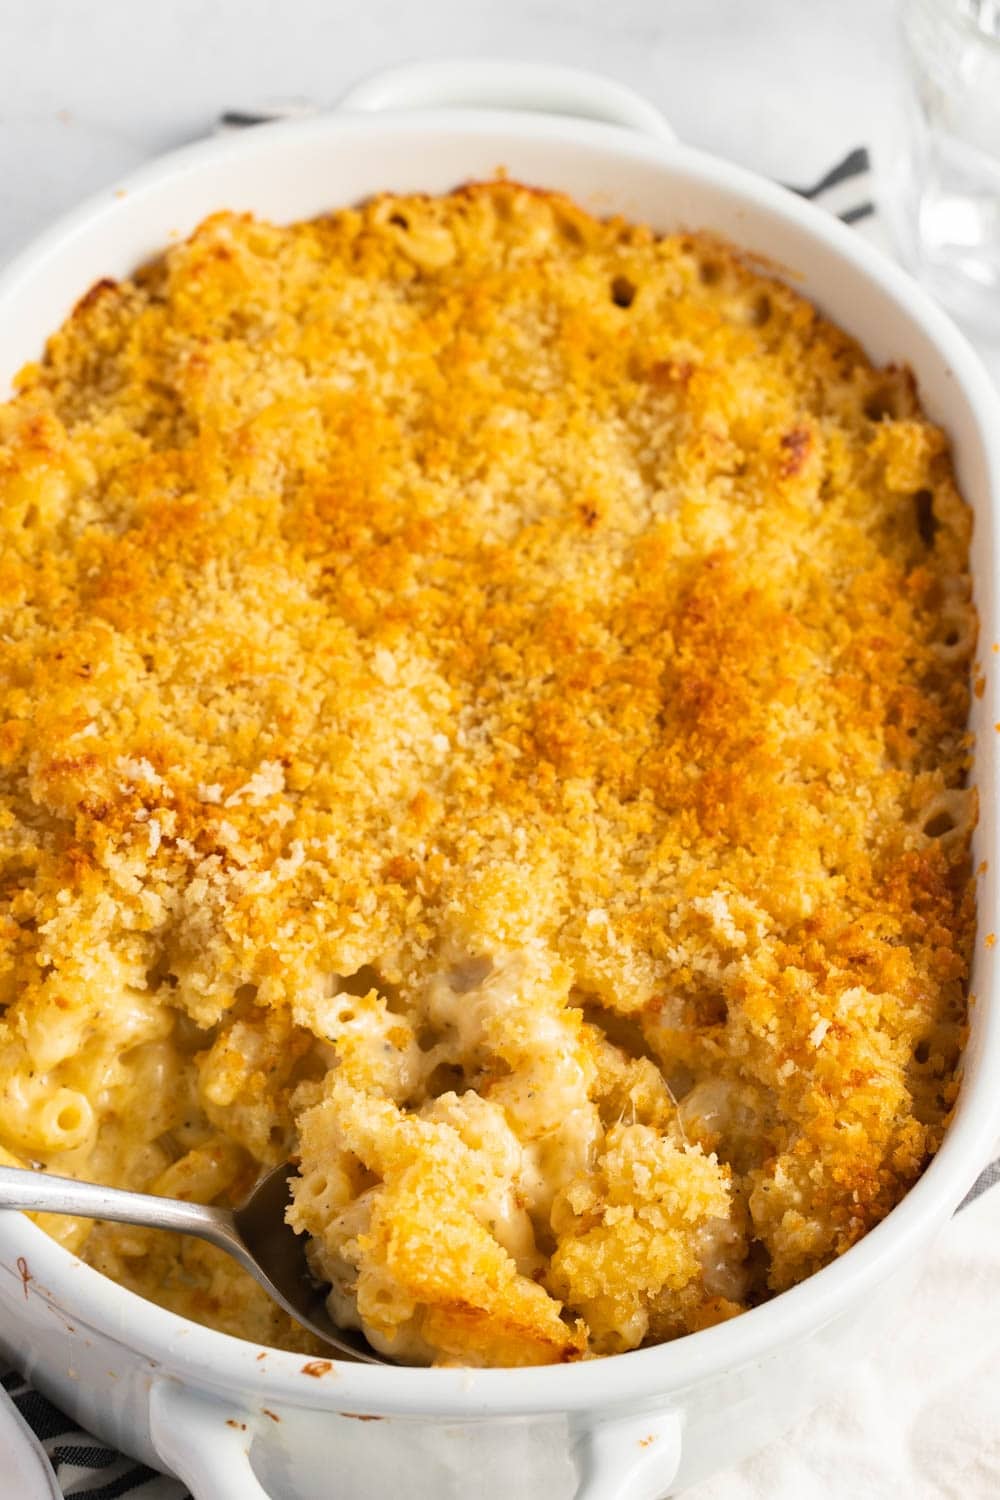 Ina Garten's Baked Mac and Cheese in a white baking dish